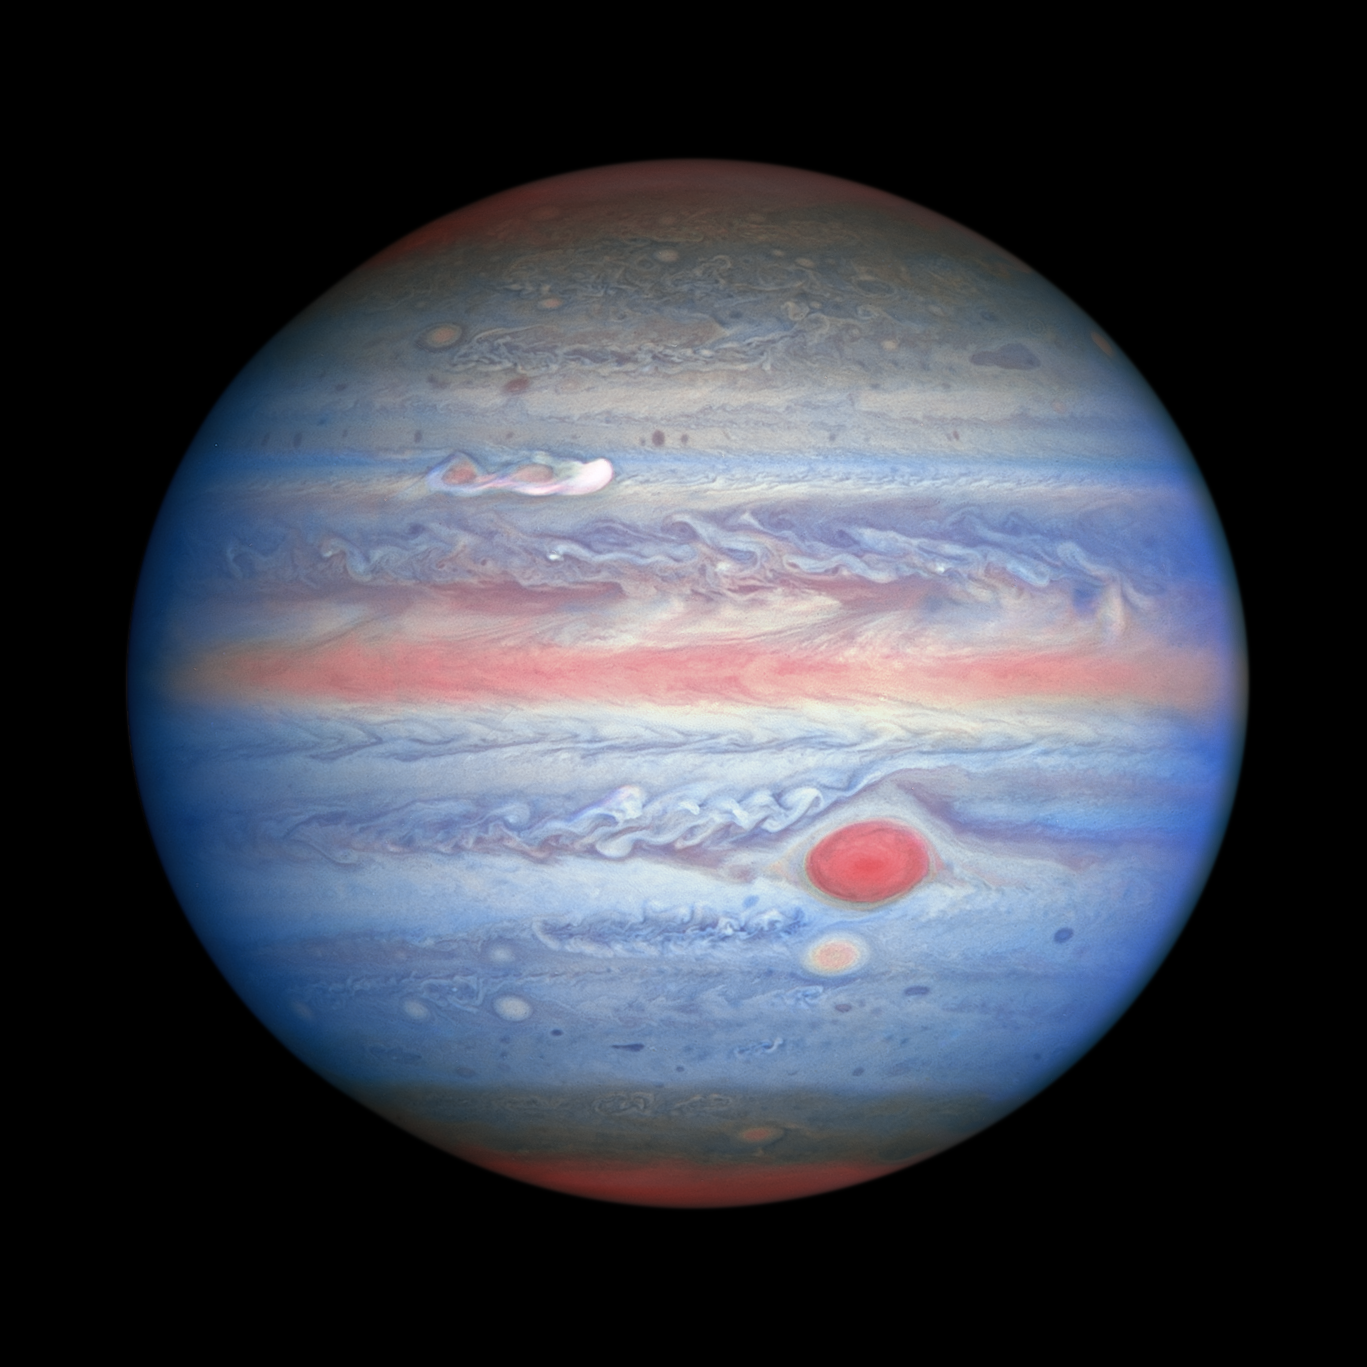 banded, red-white-and-blue-hued view of Jupiter in ultraviolet/visible/near-infrared light, as observed by Hubble